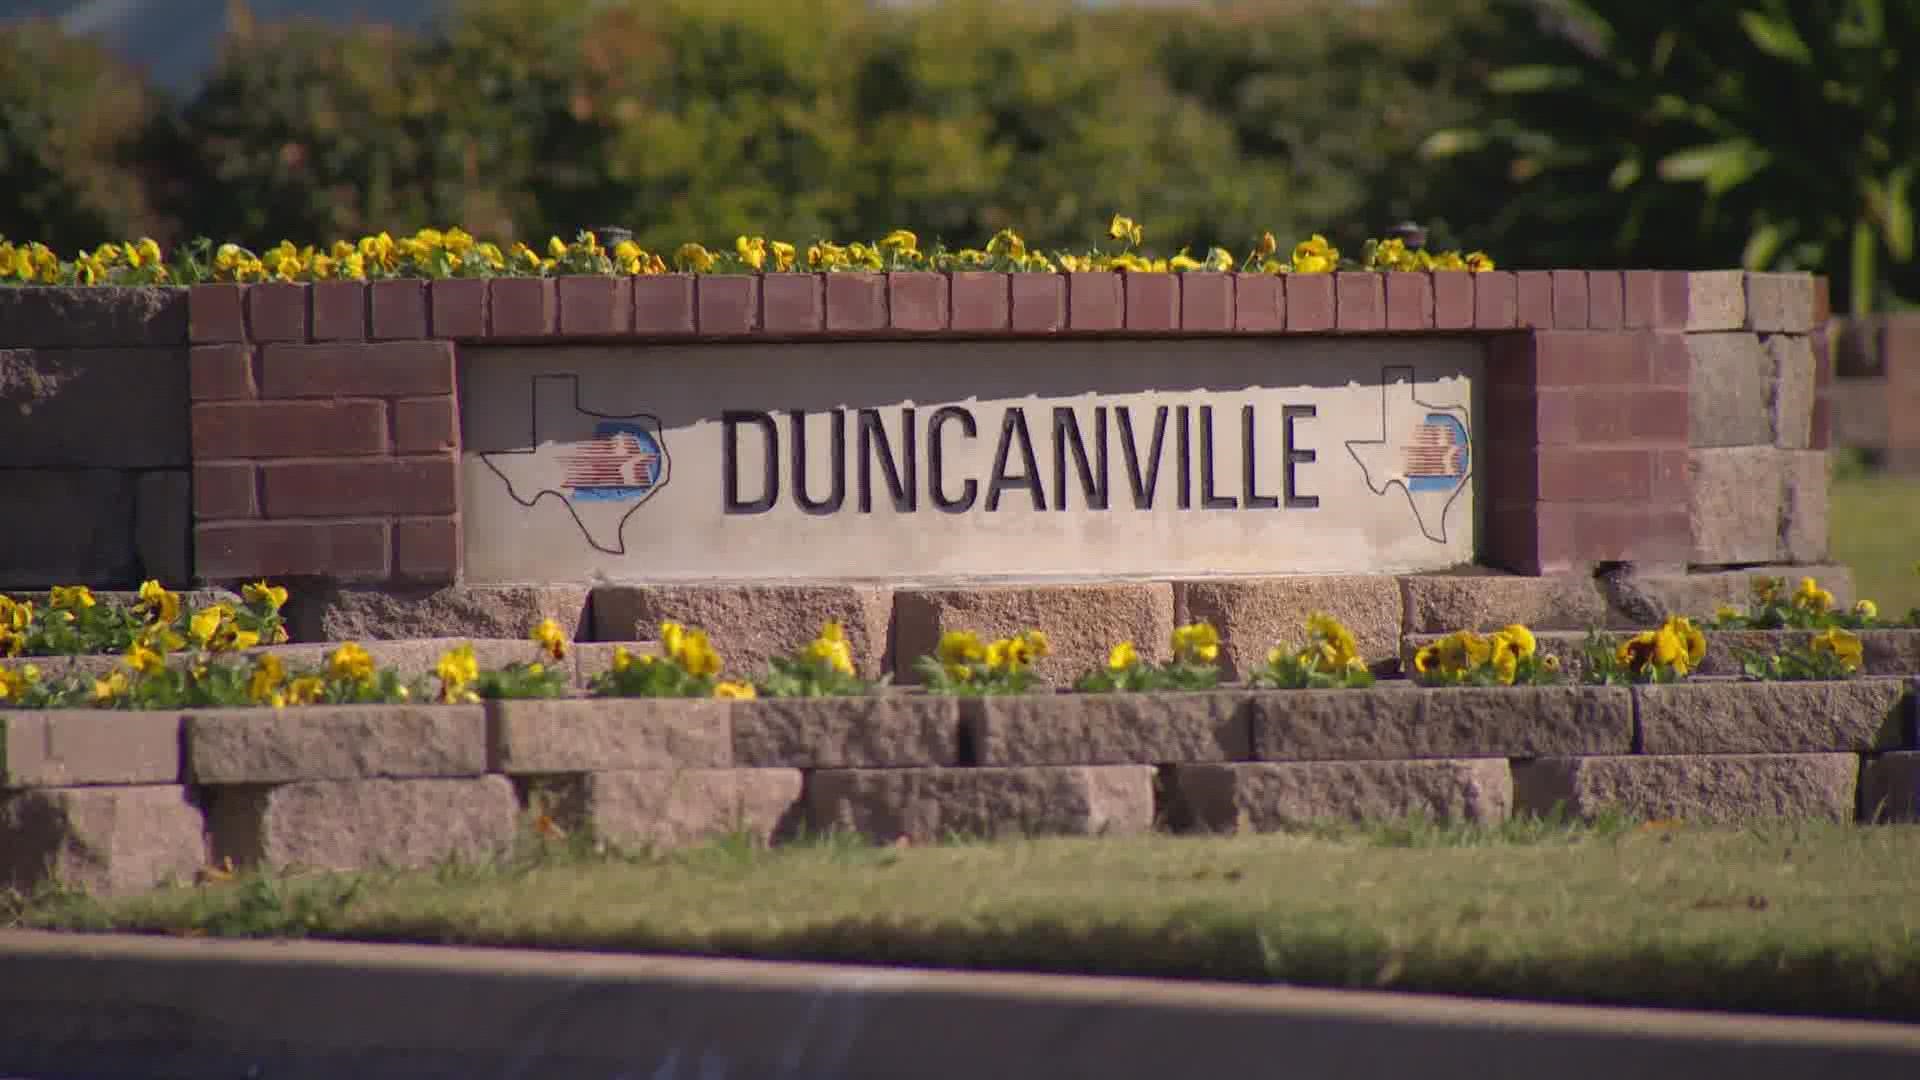 'It's a small community': Neighbors discuss what they believe makes Duncanville, Texas a special place to live, work, and play.